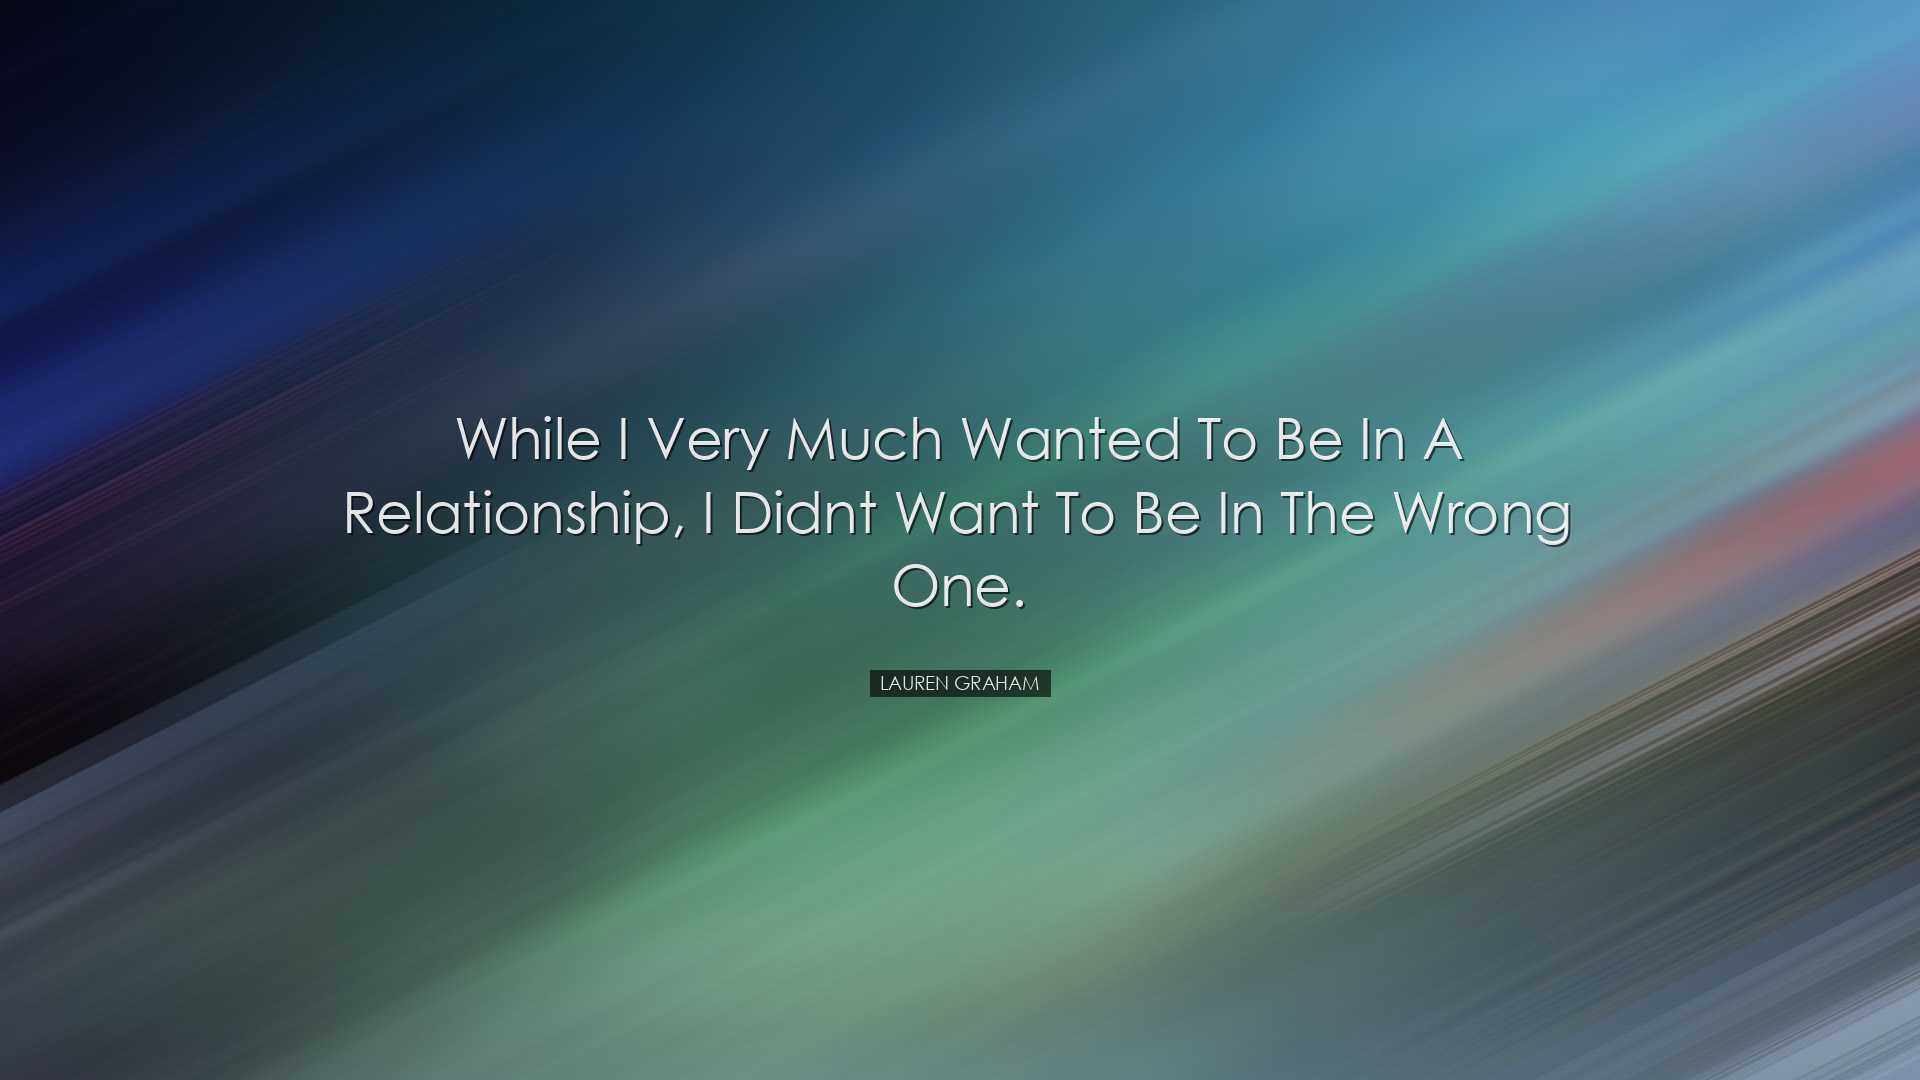 While I very much wanted to be in a relationship, I didnt want to